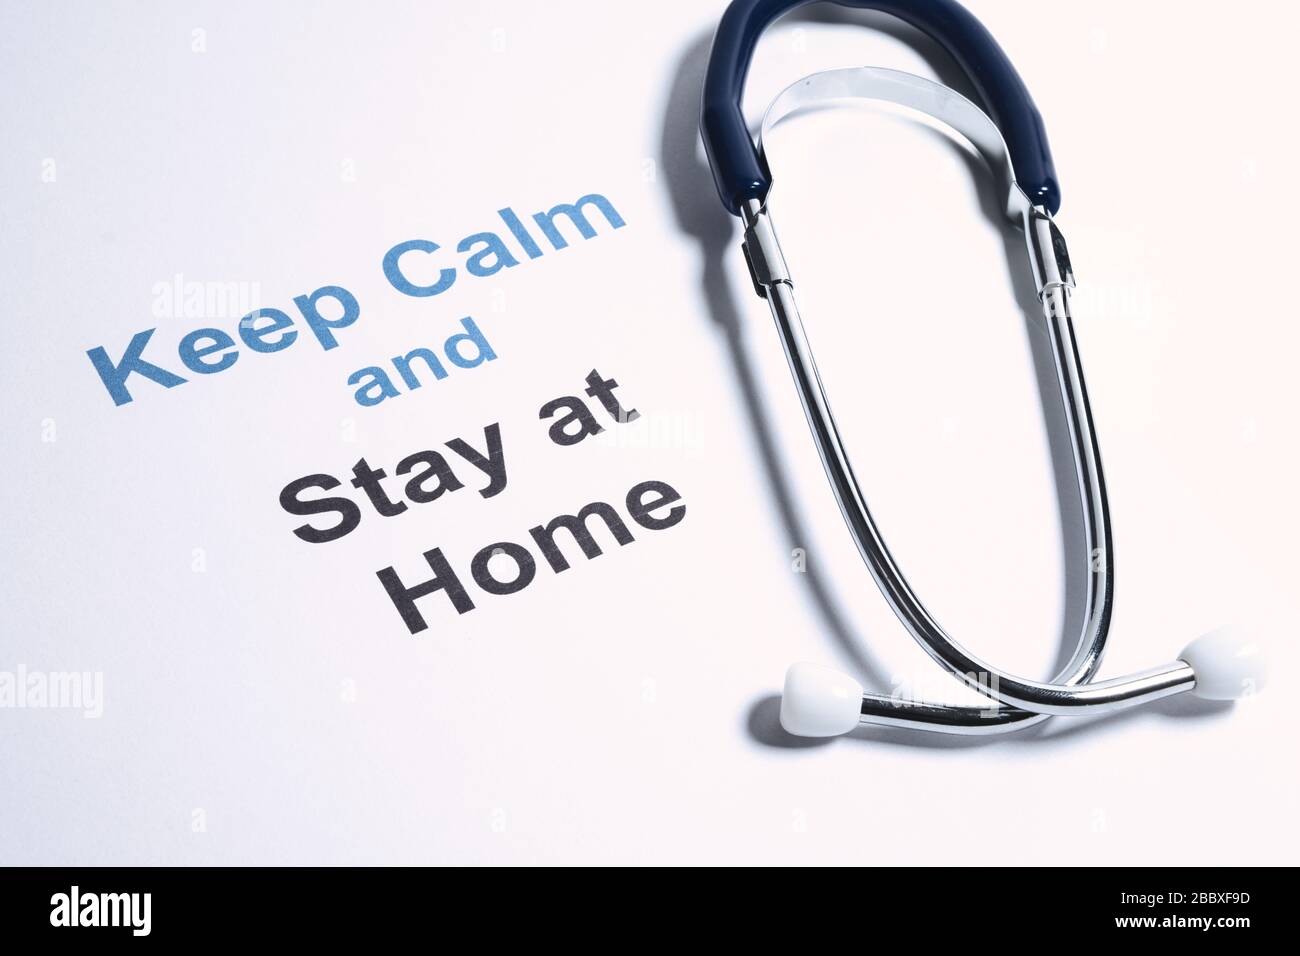 Keep calm and stay at home text. Concept idea of quarantine or social isolation advice for novel coronavirus or COVID-19 pandemic Stock Photo